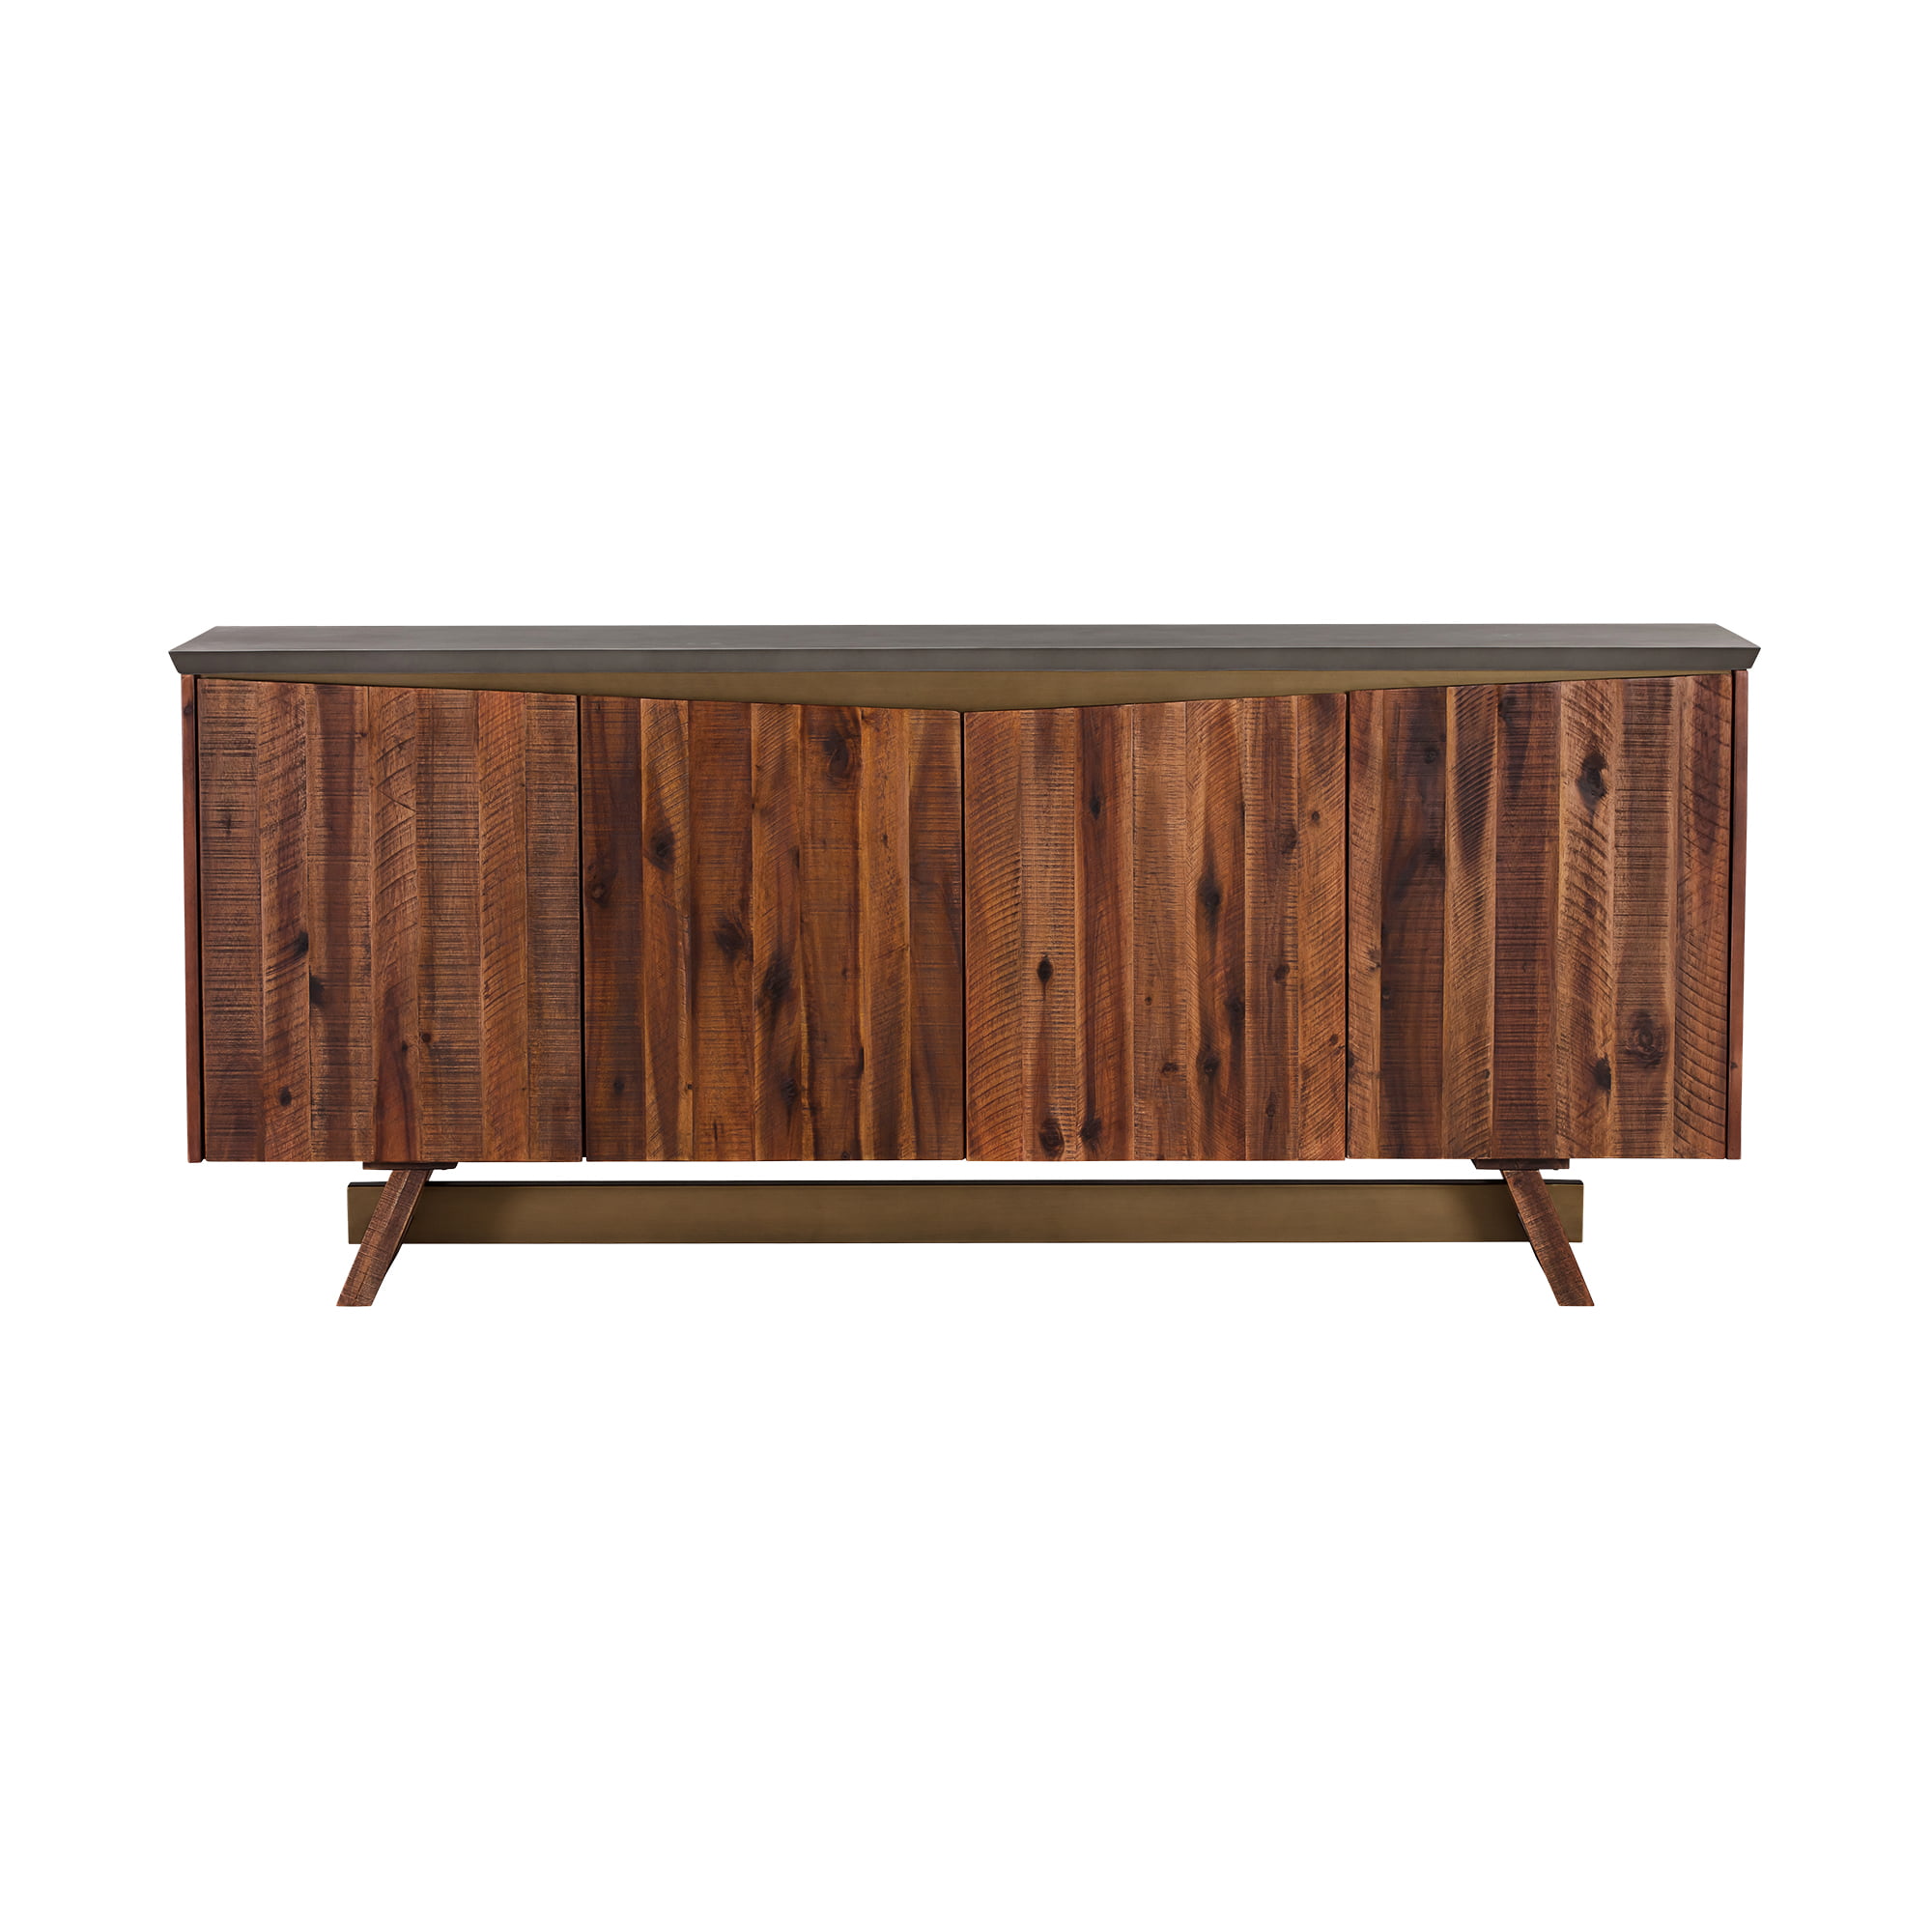 Picture of Armen Living LCPJBUCC Picadilly 4 Door Sideboard Buffet in Acacia Wood & Concrete